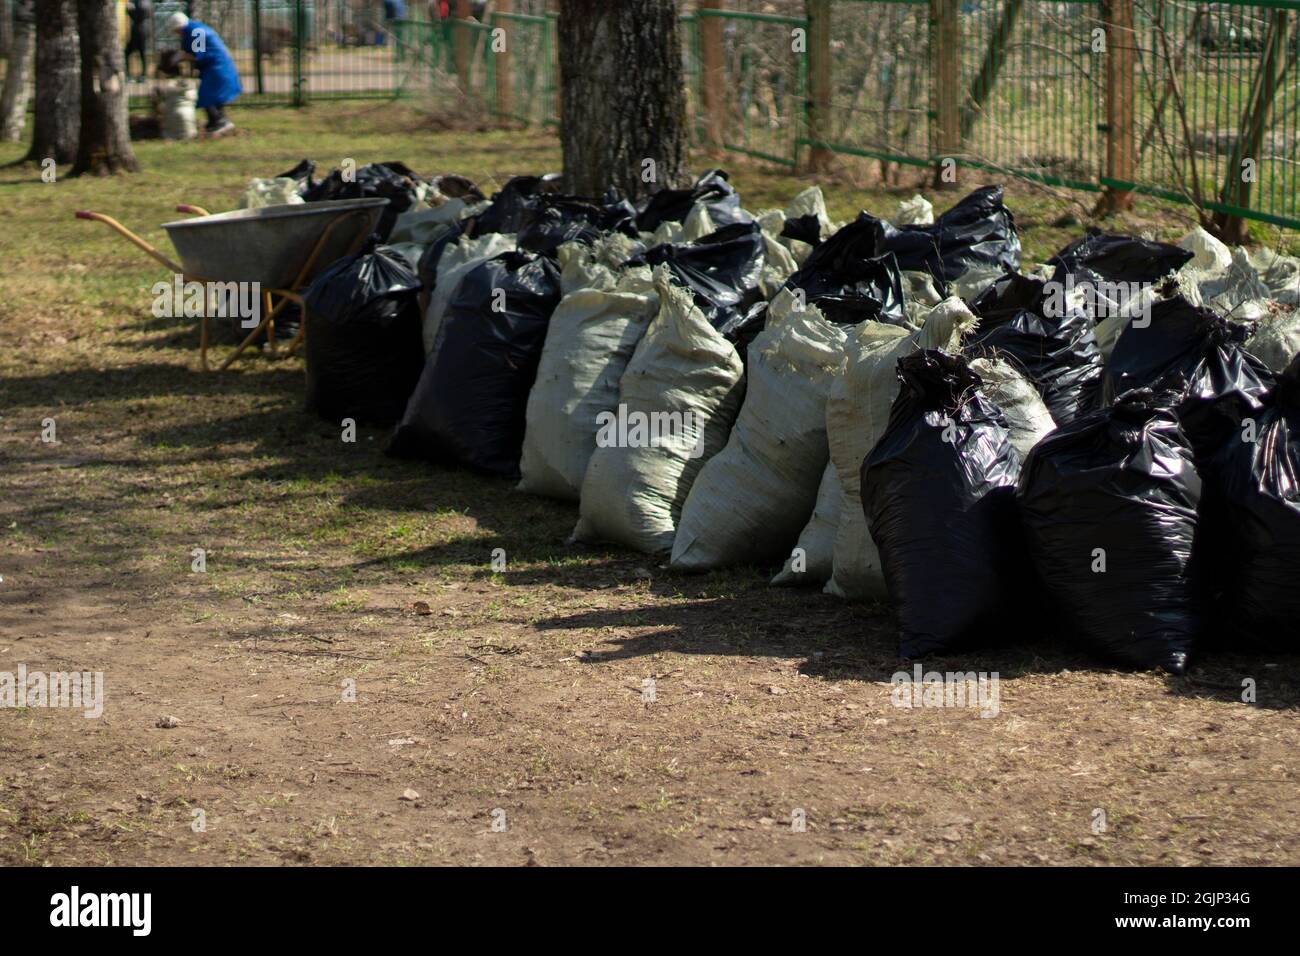 https://c8.alamy.com/comp/2GJP34G/bags-of-leaves-waste-bags-the-result-of-cleaning-the-yard-lots-of-waste-bags-inside-2GJP34G.jpg